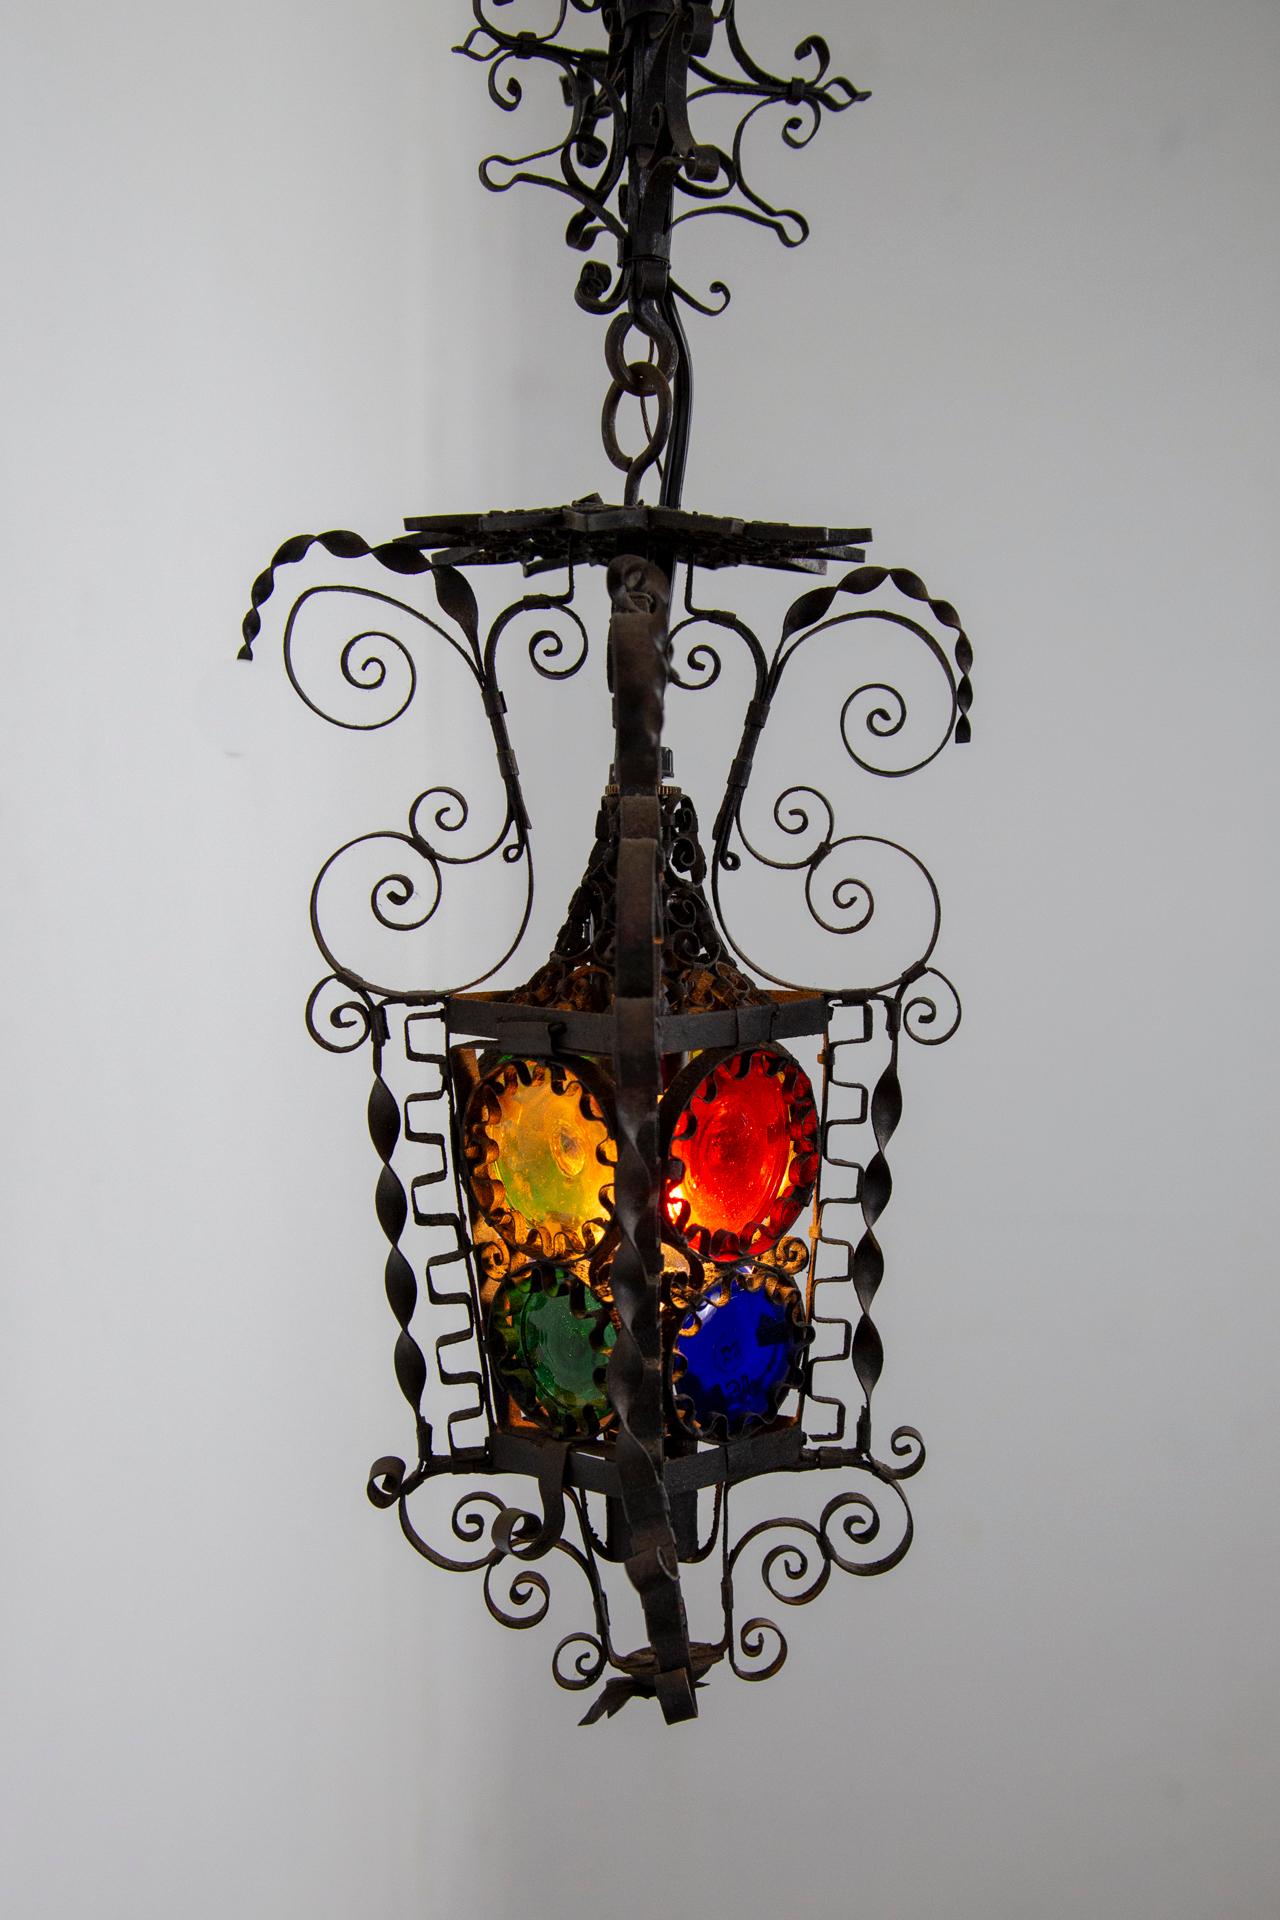 19th Century Black Filigree Iron Hanging Wall Lantern W/ Colored Glass For Sale 3